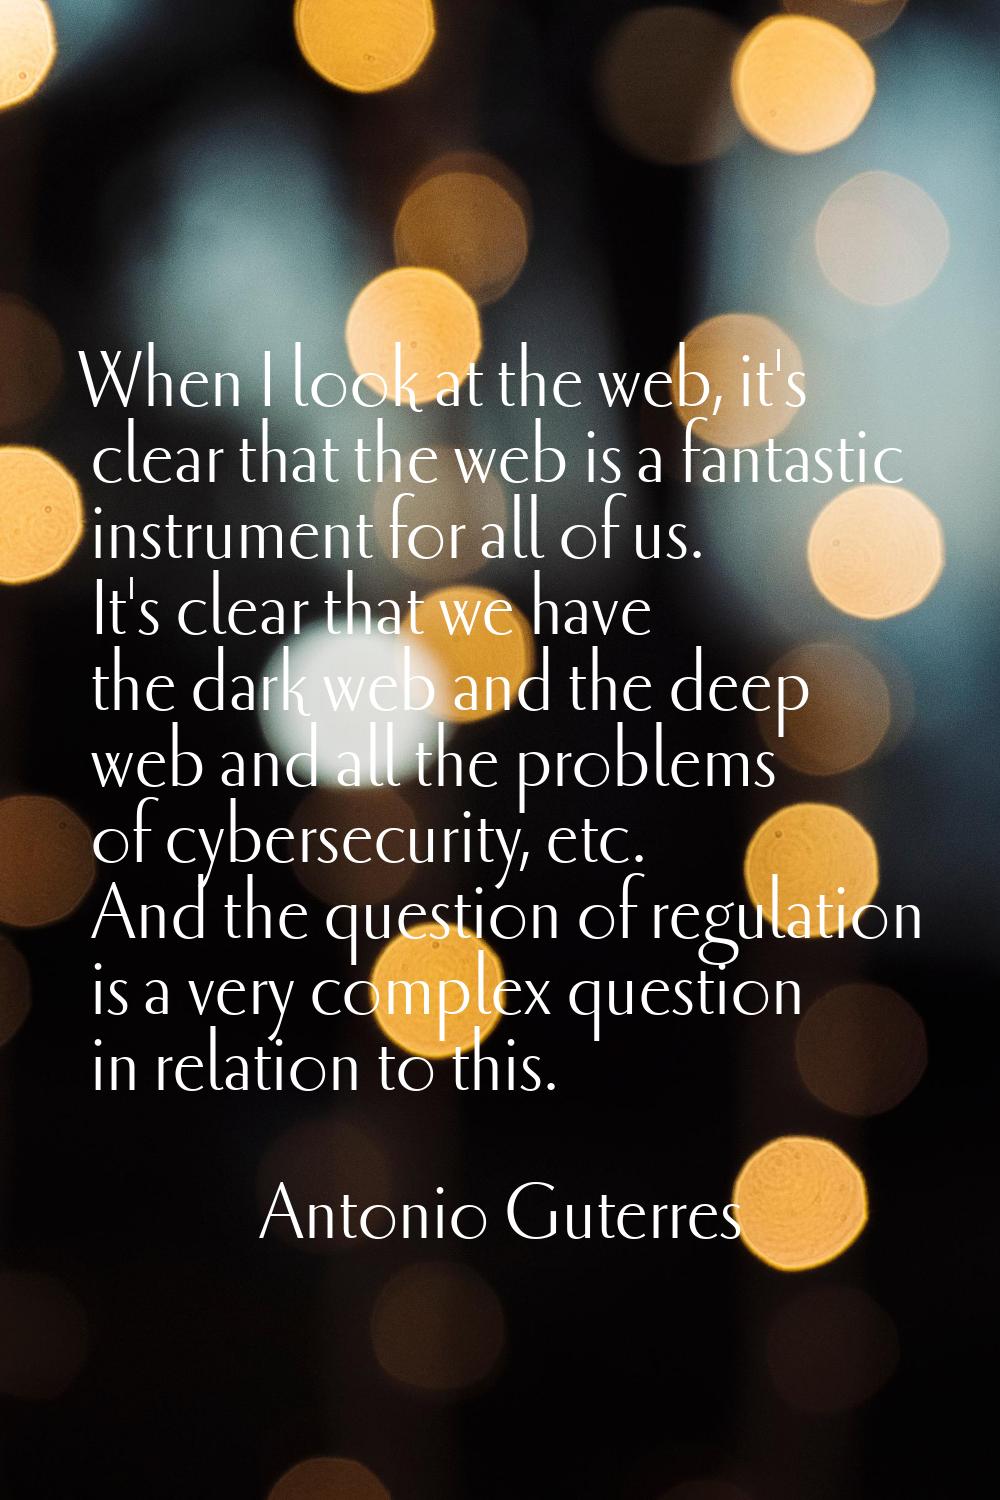 When I look at the web, it's clear that the web is a fantastic instrument for all of us. It's clear